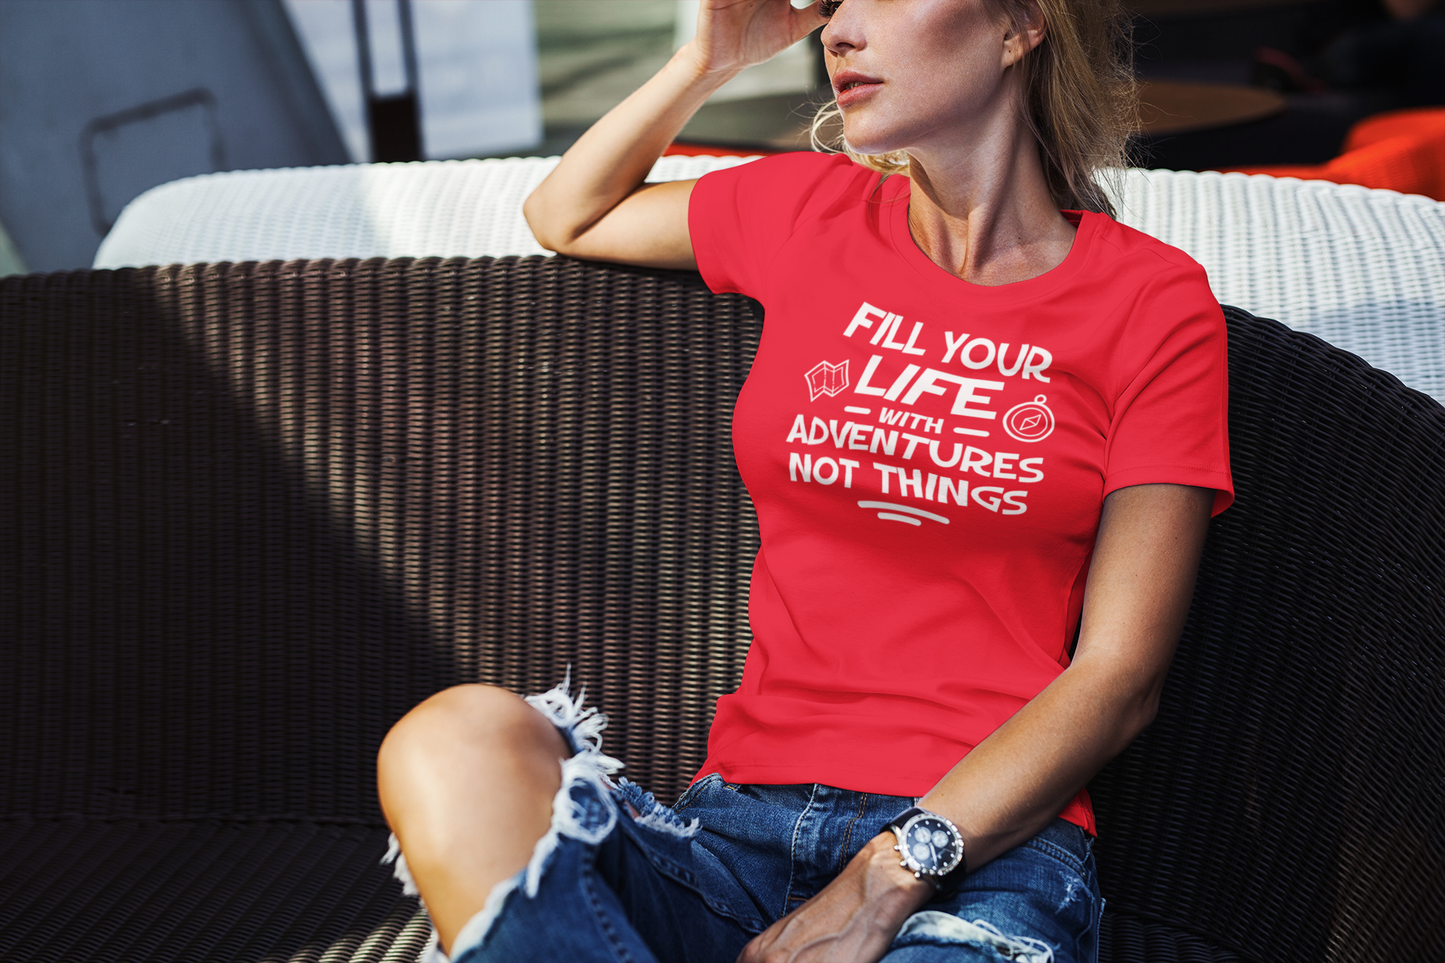 FILL YOUR LIFE WITH ADVENTURES - T-SHIRT